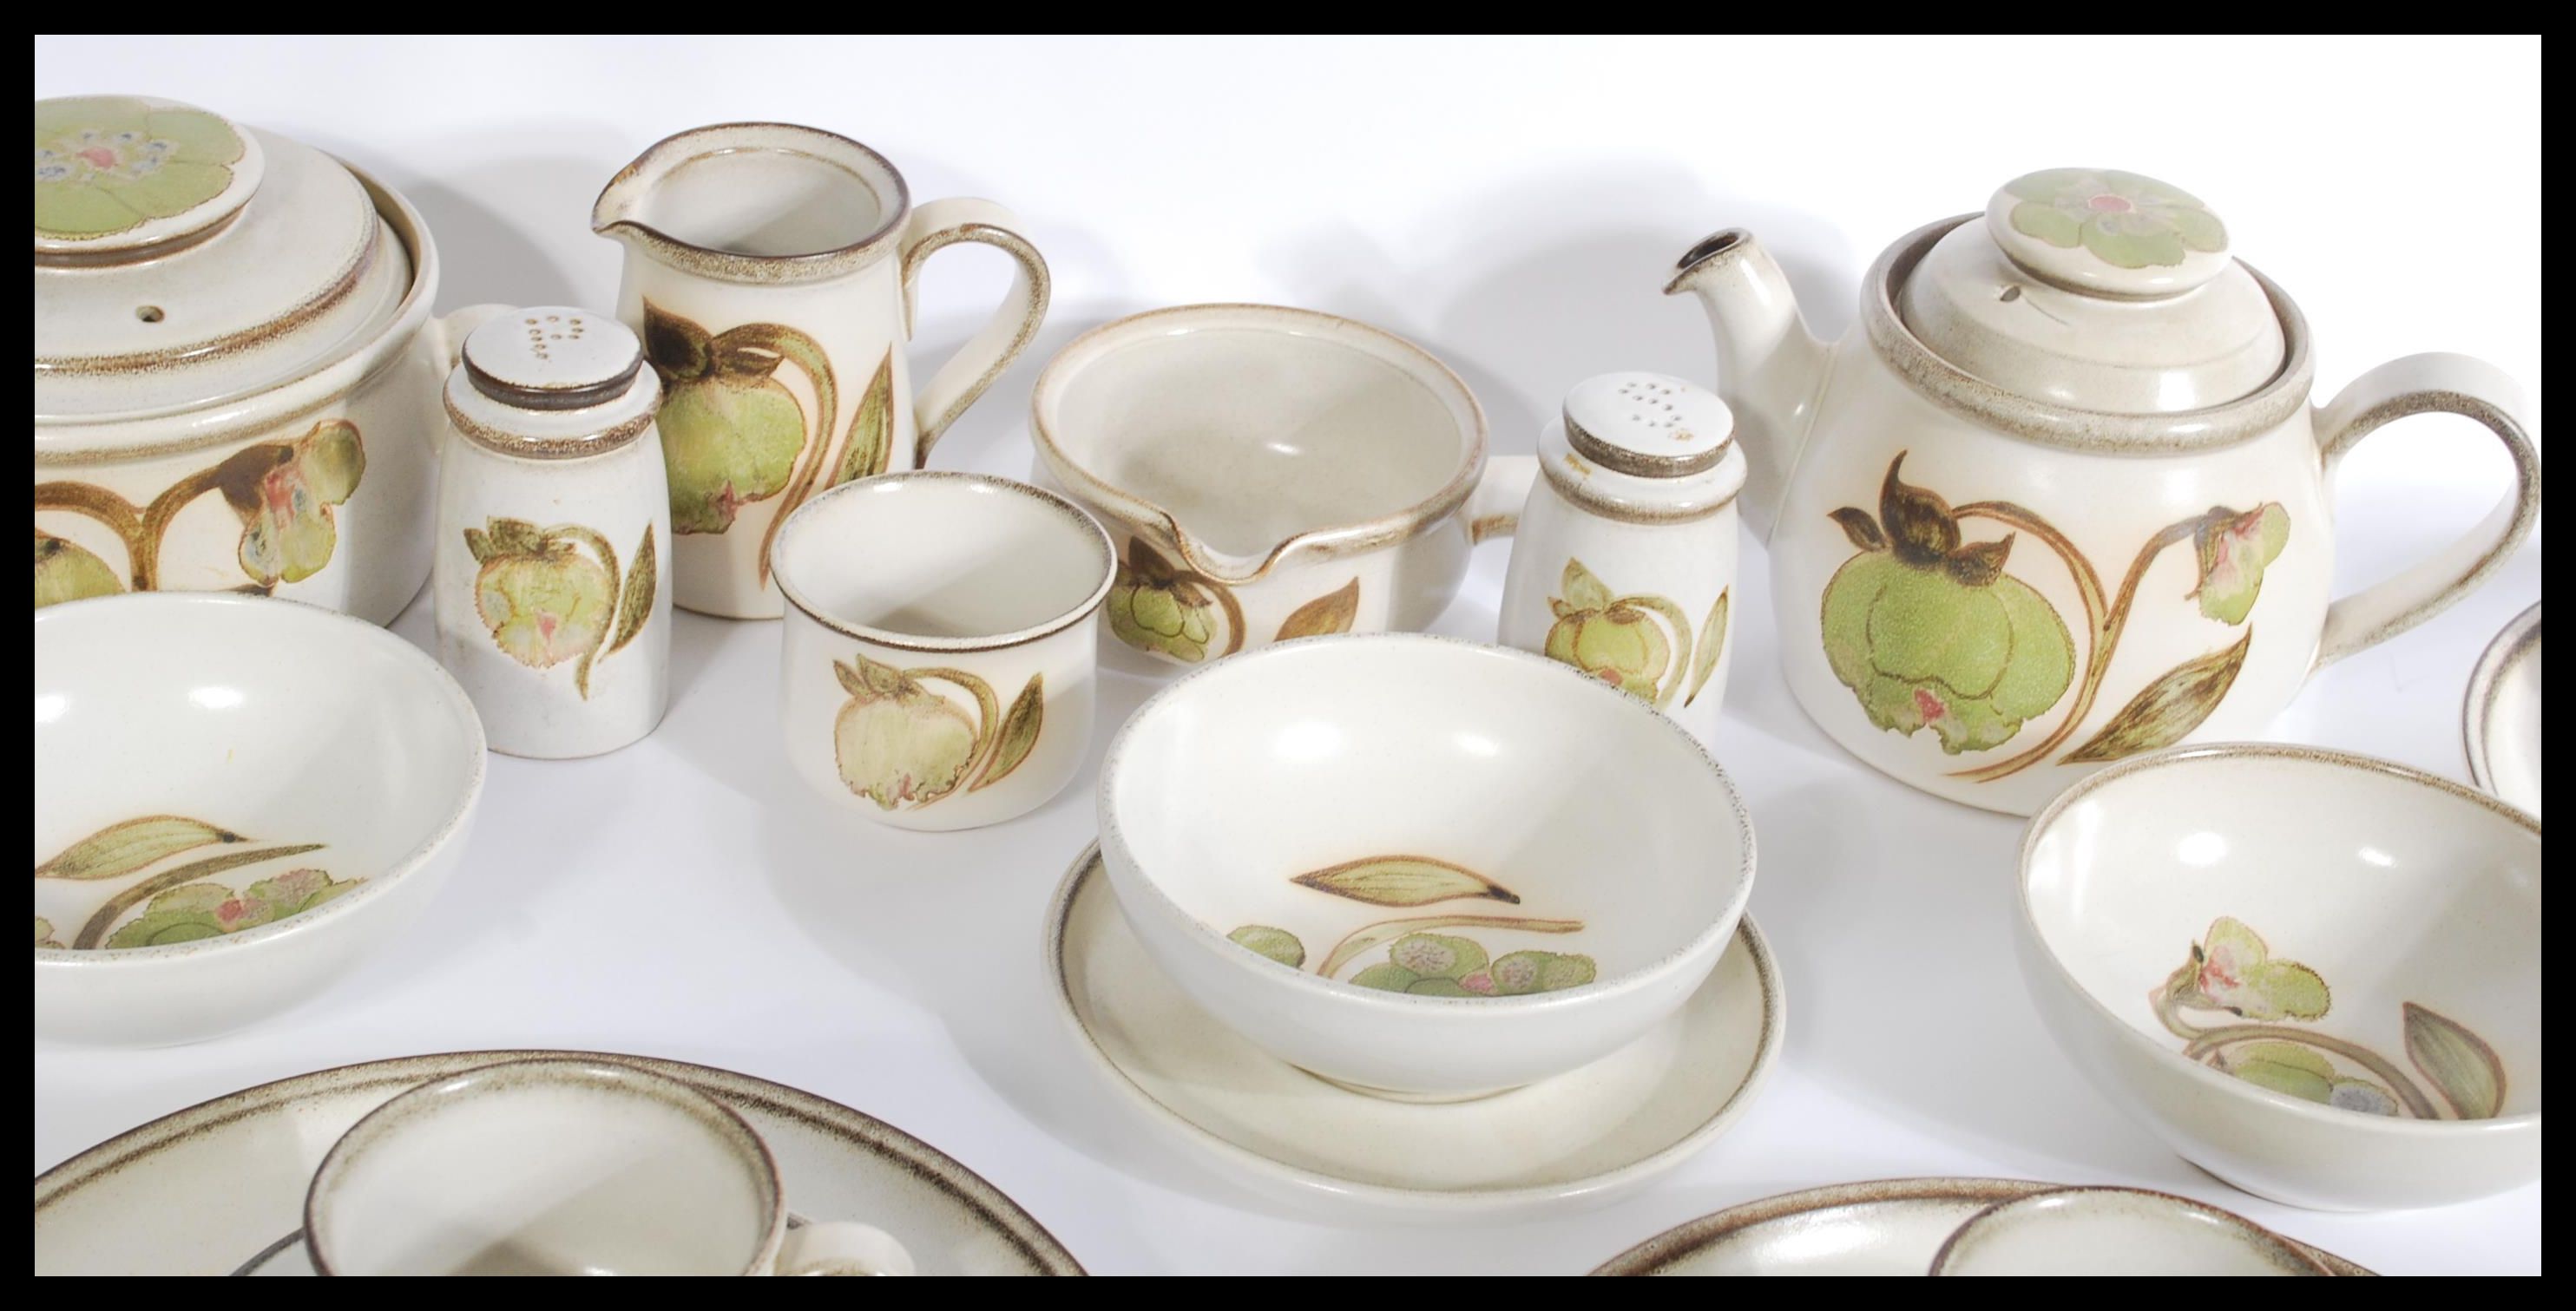 A vintage 20th century stoneware dinner service in - Image 5 of 8